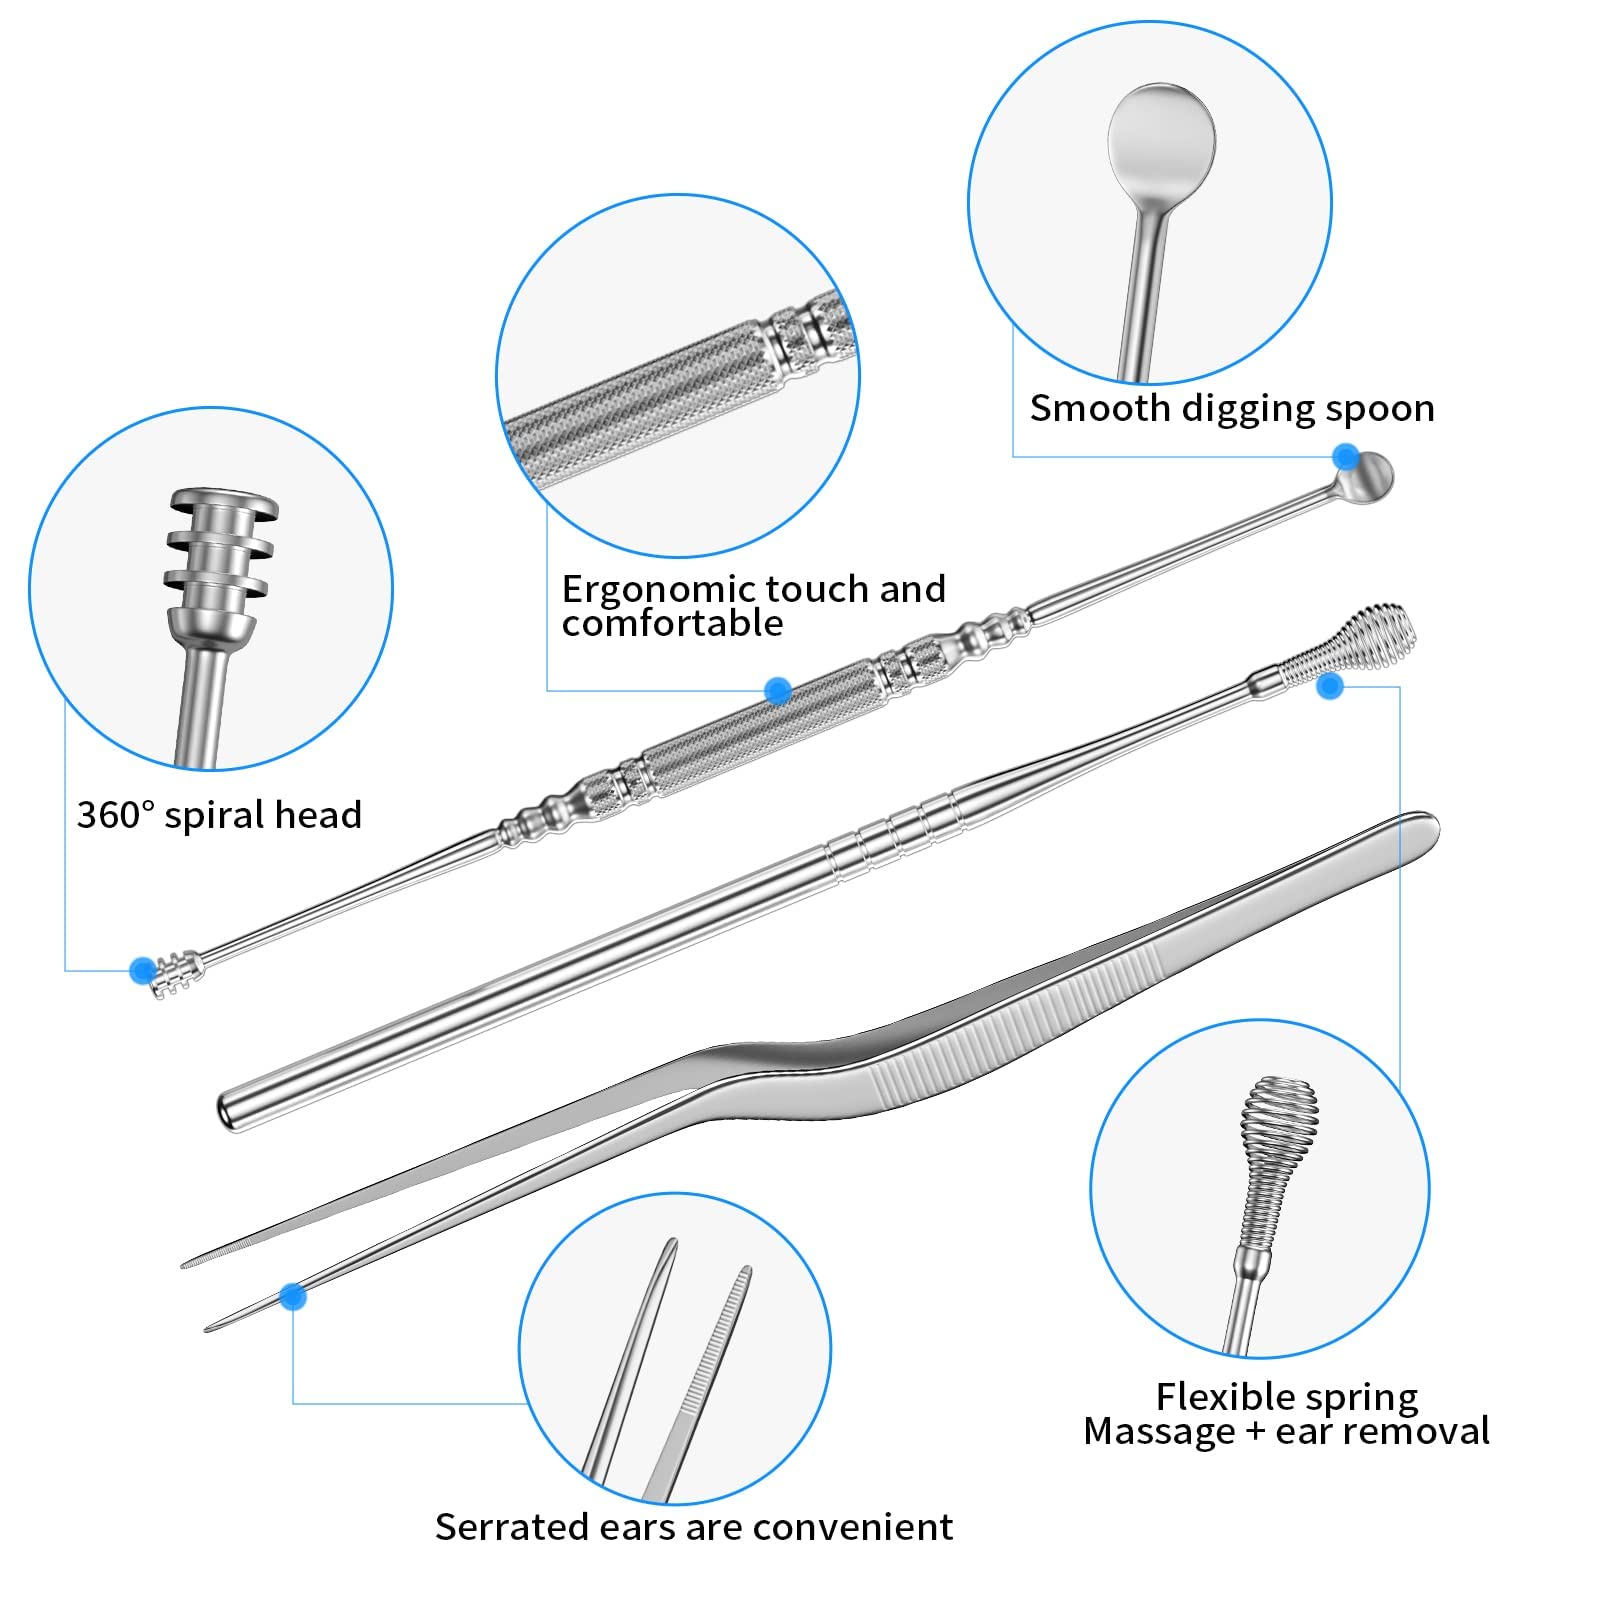 Ear Wax Removal Ear Cleaner - 16PCS Ear Cleaning Kit, 316 Stainless 360° Spiral Ear Wax Remover Kit, Professional/Multi-Functional Earwax Remover Curette with Clean Brush/Metal Case